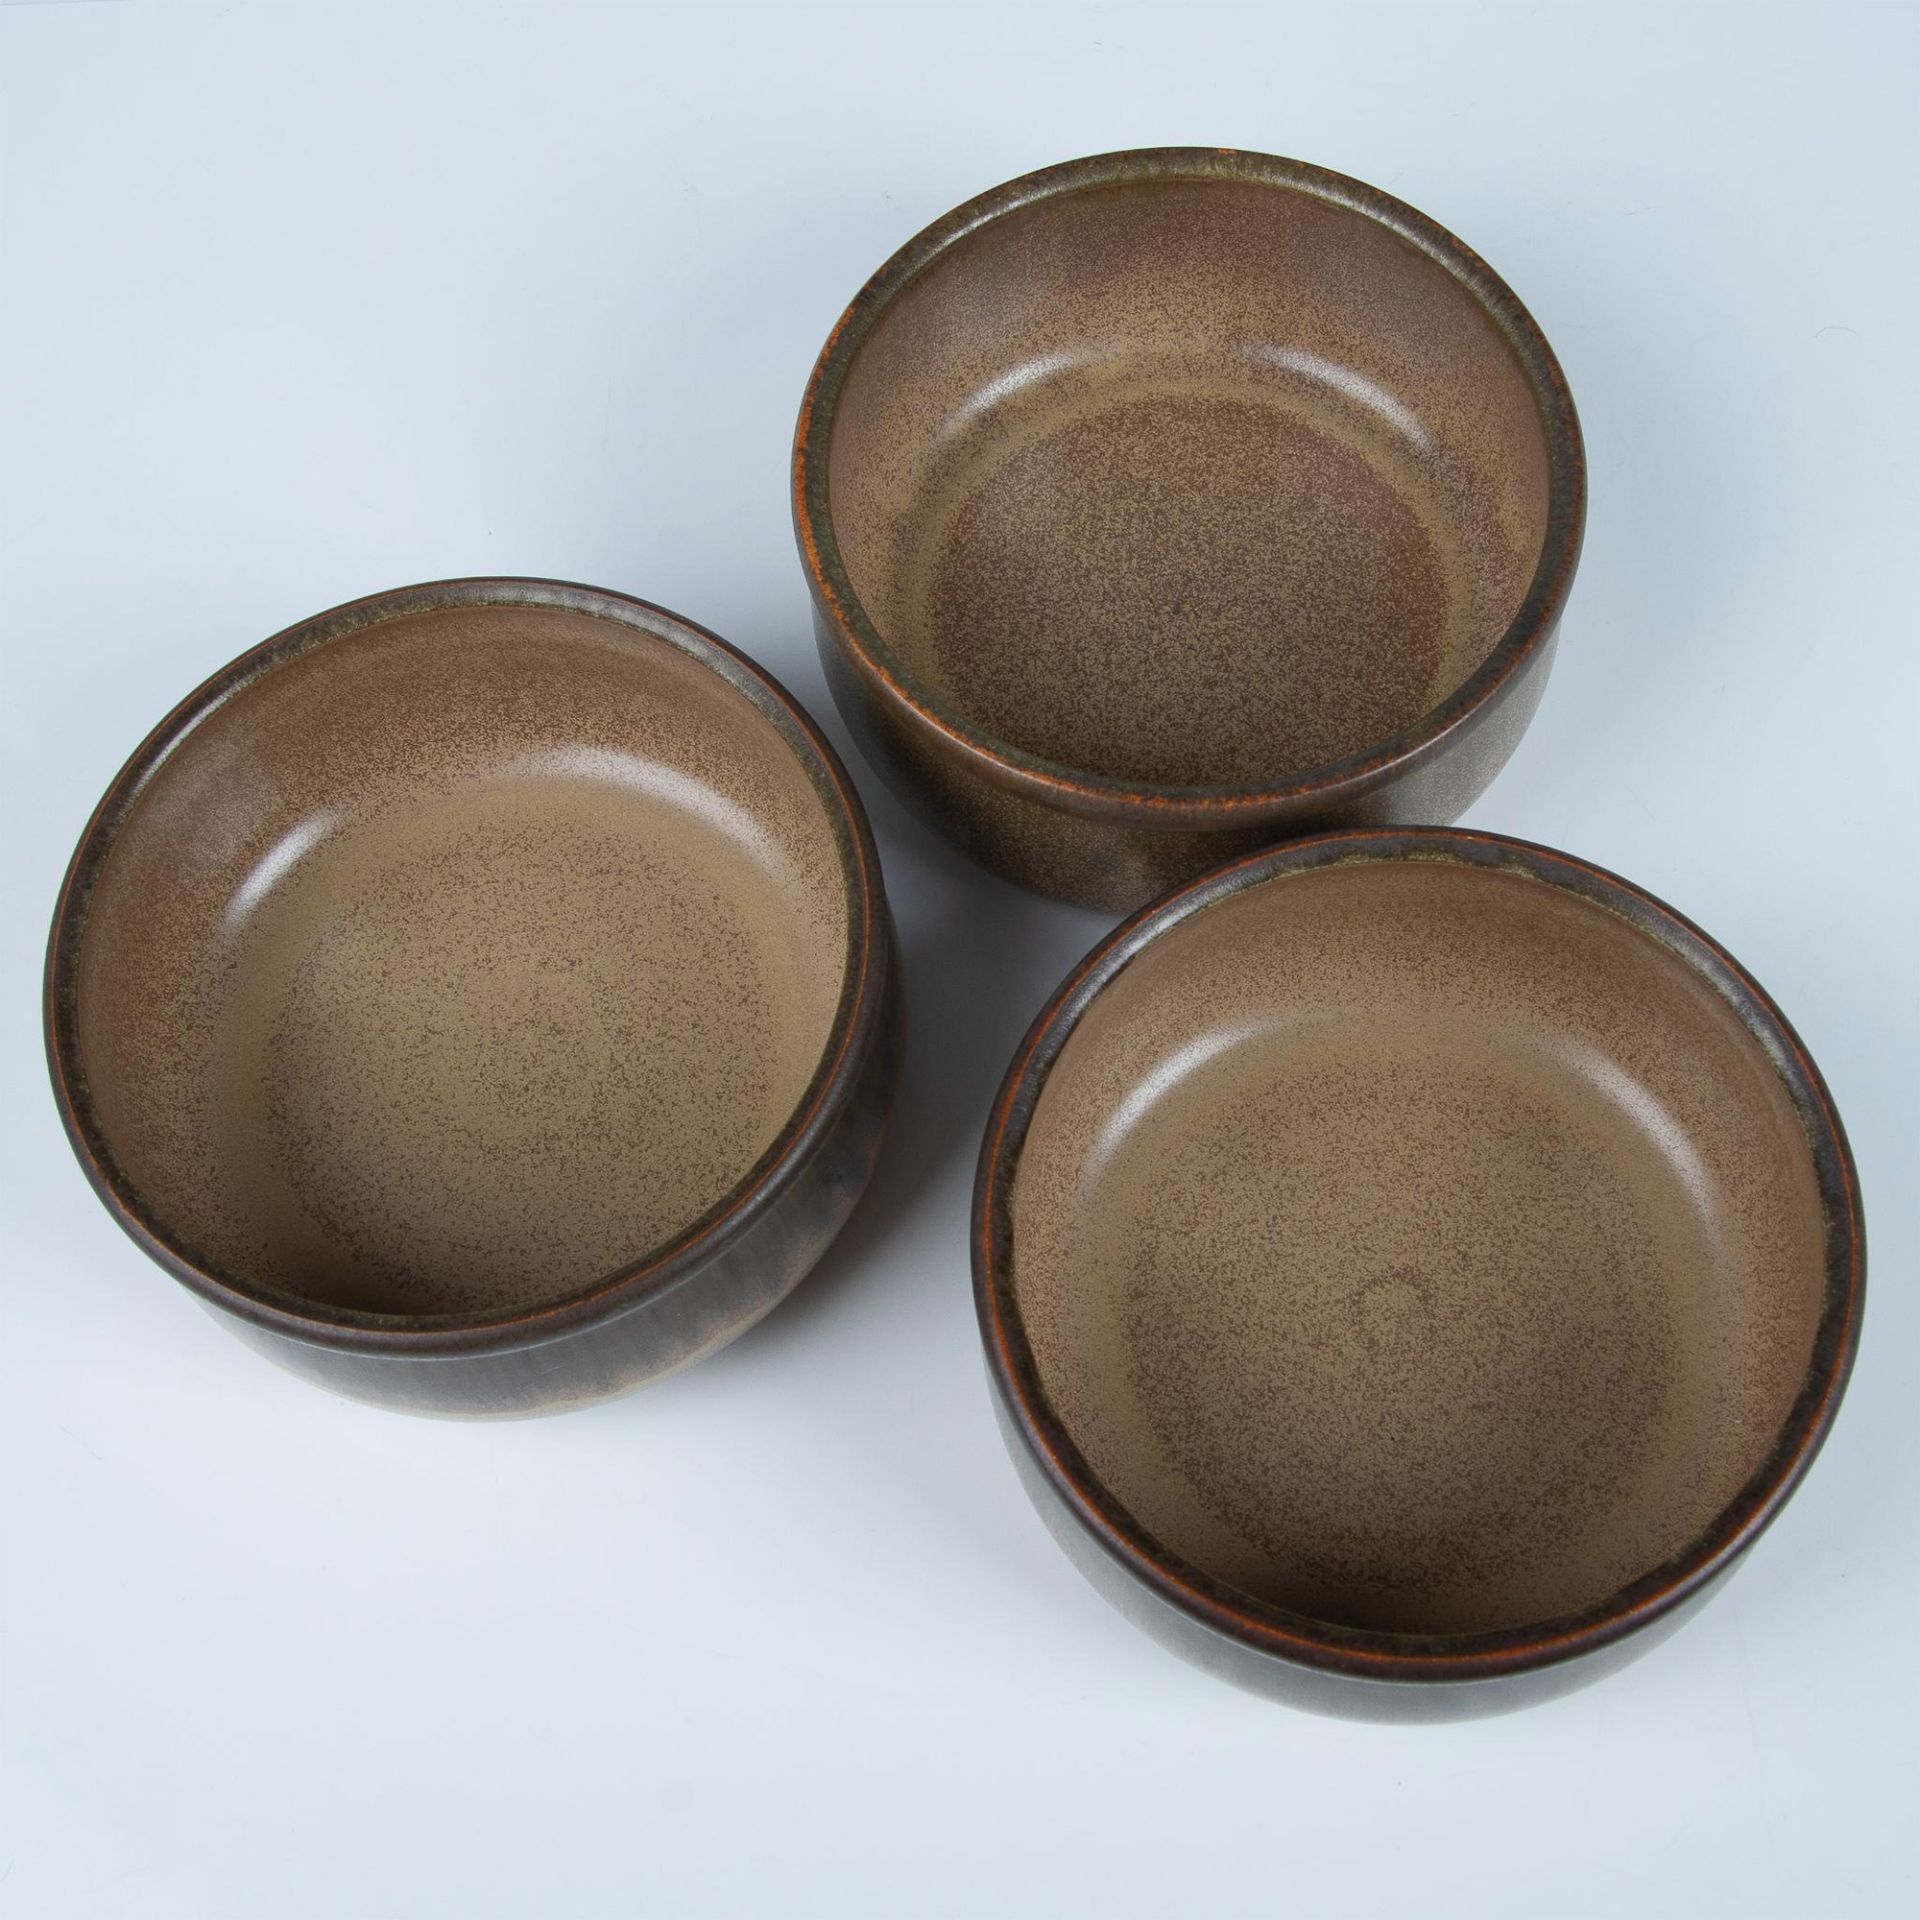 58pc Denby-Langley Stoneware Dinnerware Set, Romany Brown - Image 18 of 19